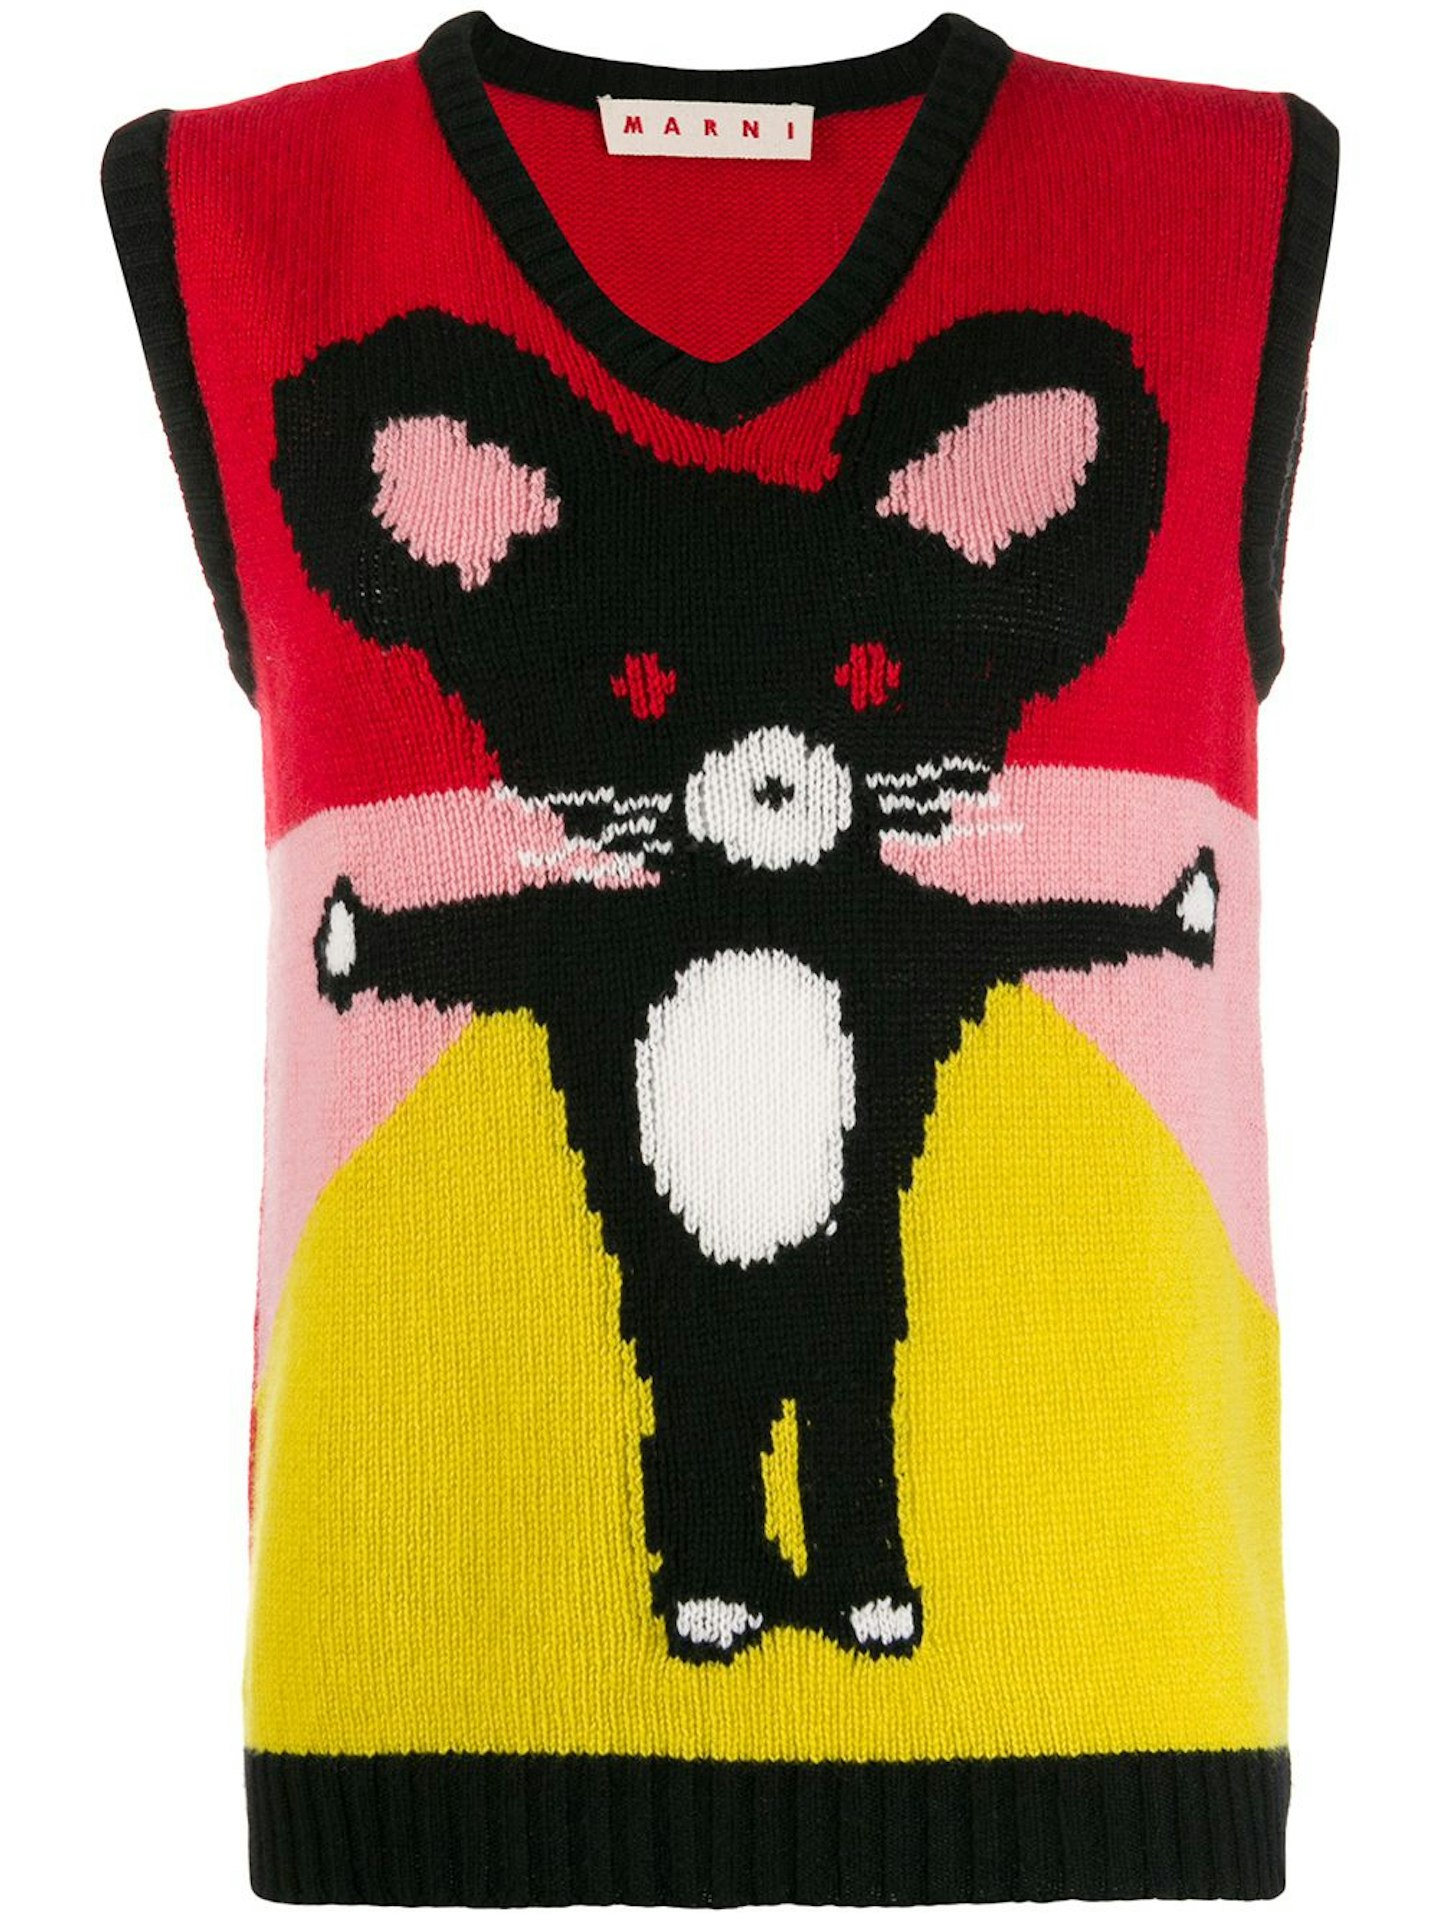 Marni, Chinese New Year 2020 knitted top, £620